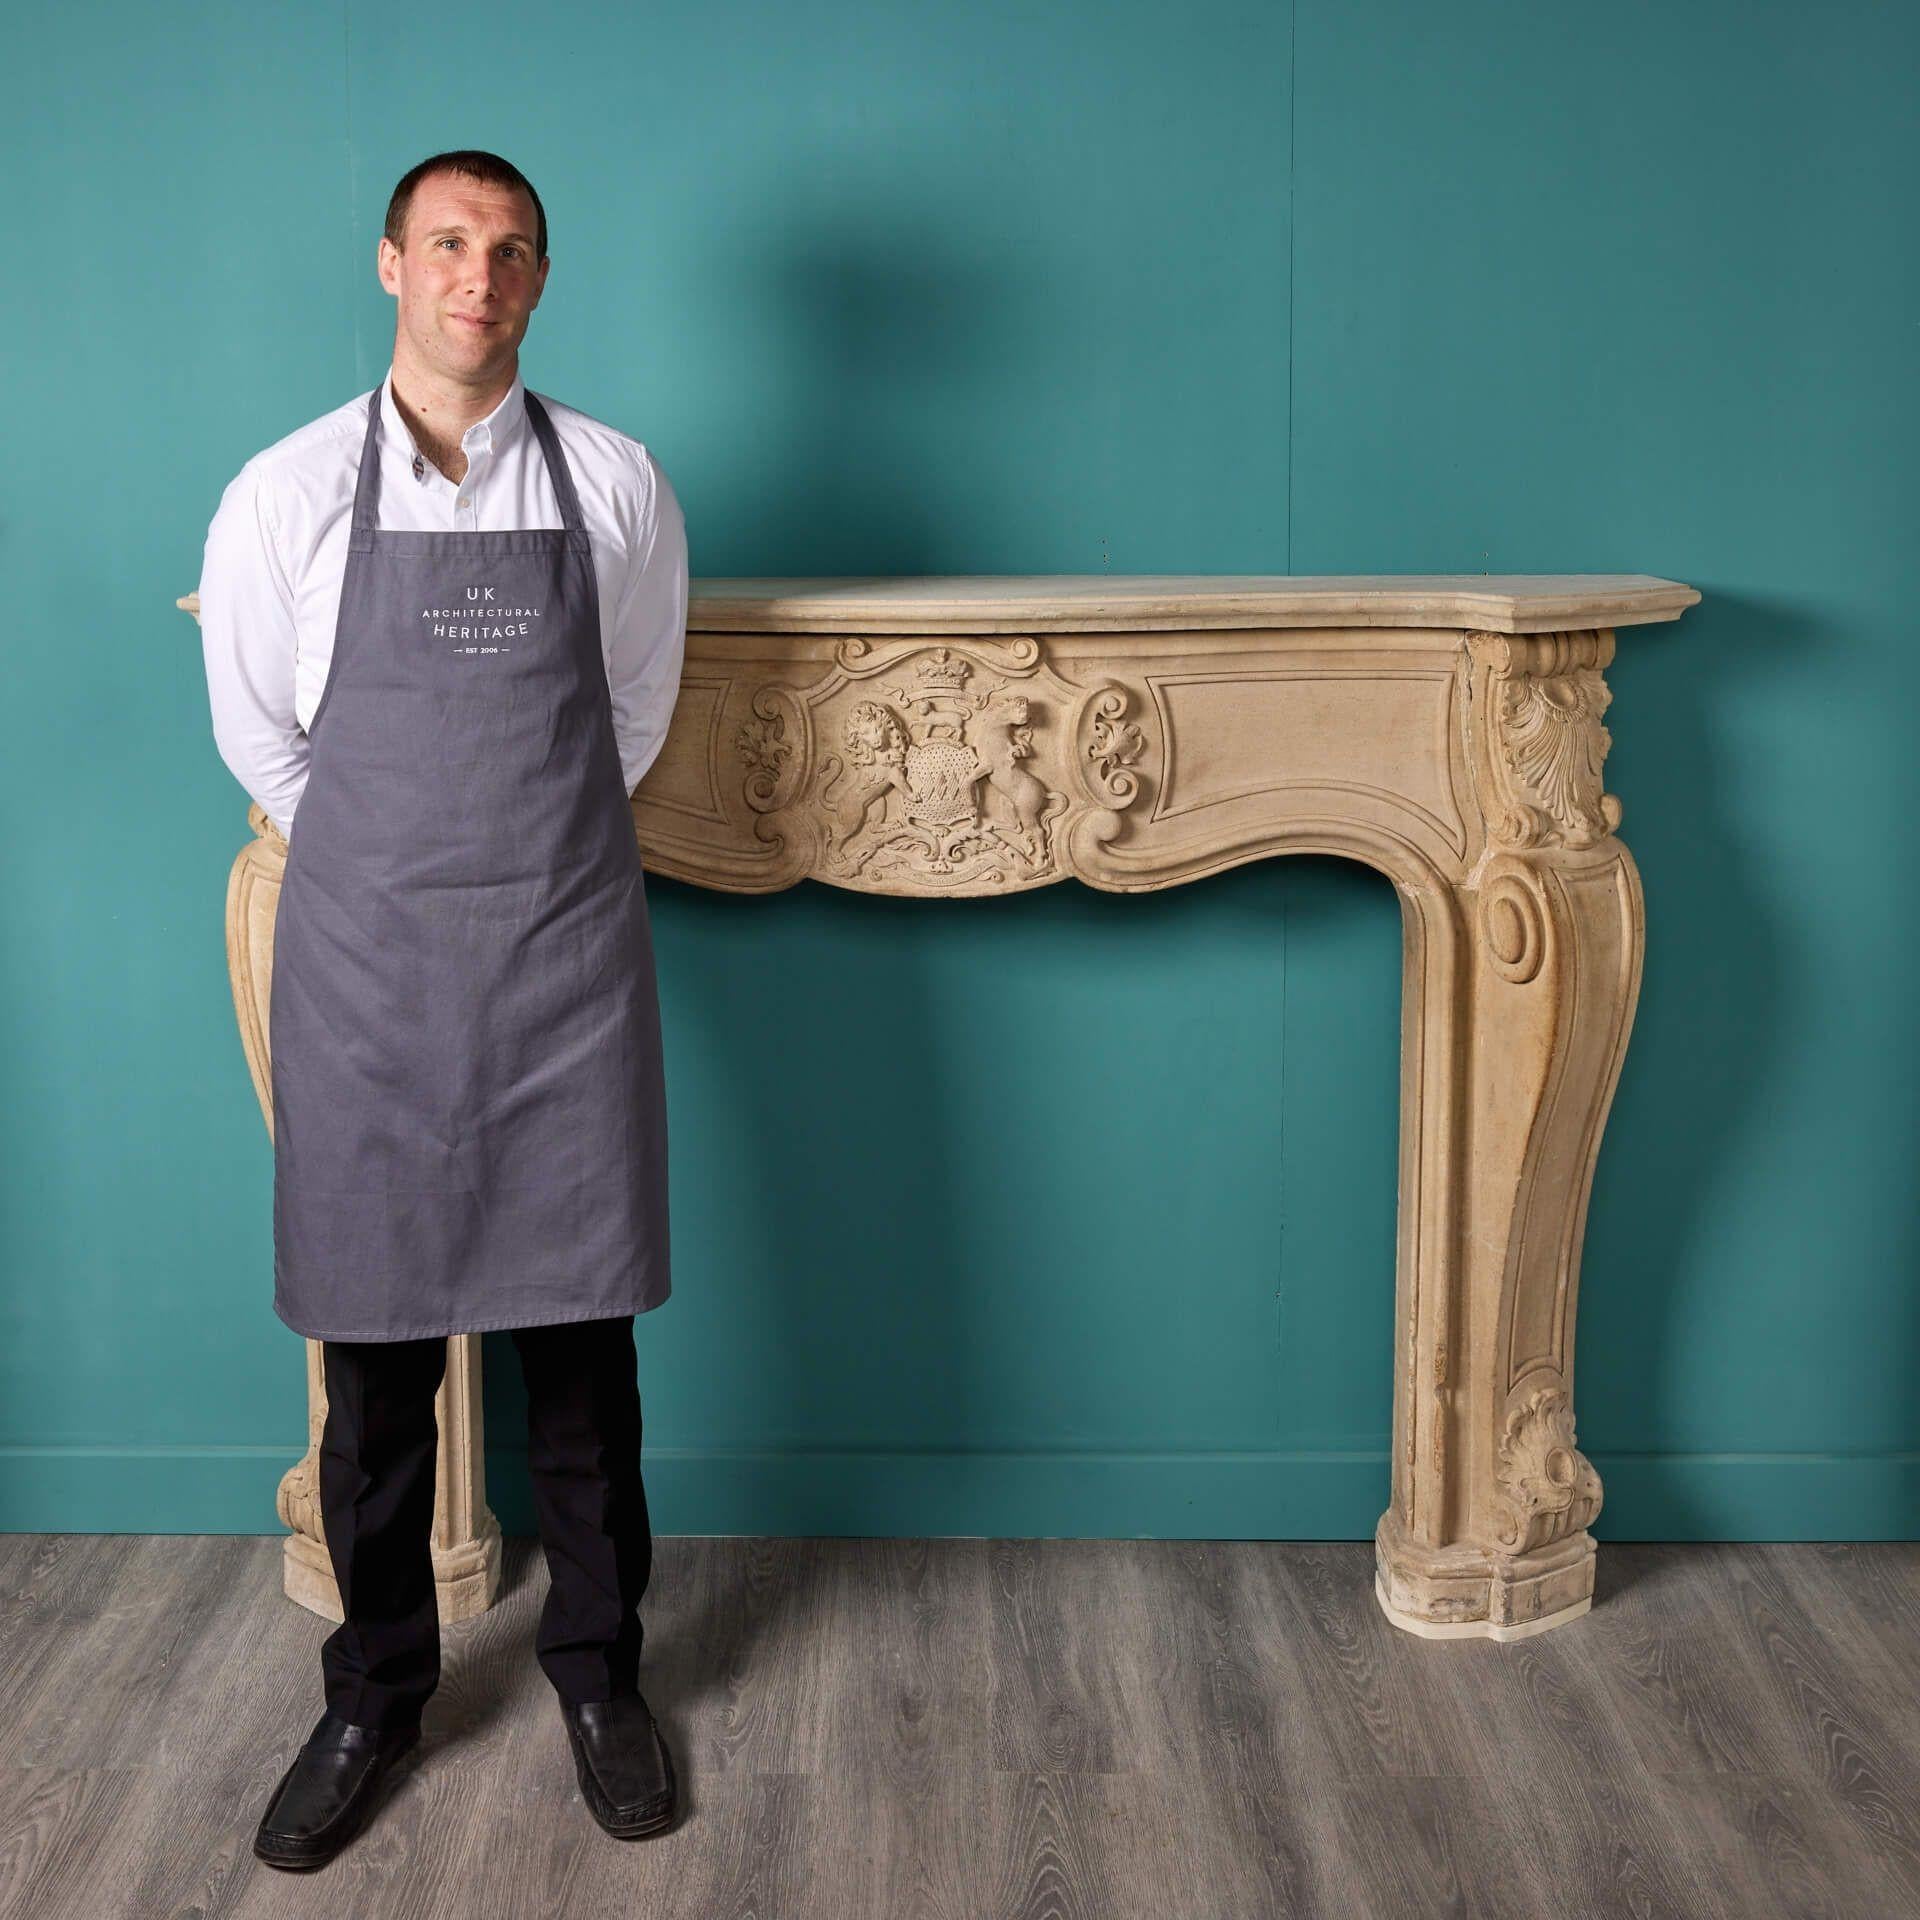 This spectacular antique limestone fire mantel is an extremely rare and unique find, steeped in centuries old English history. It once resided at Warter Priory in Pocklington, Yorkshire UK and is exquisitely hand carved in the French style with the